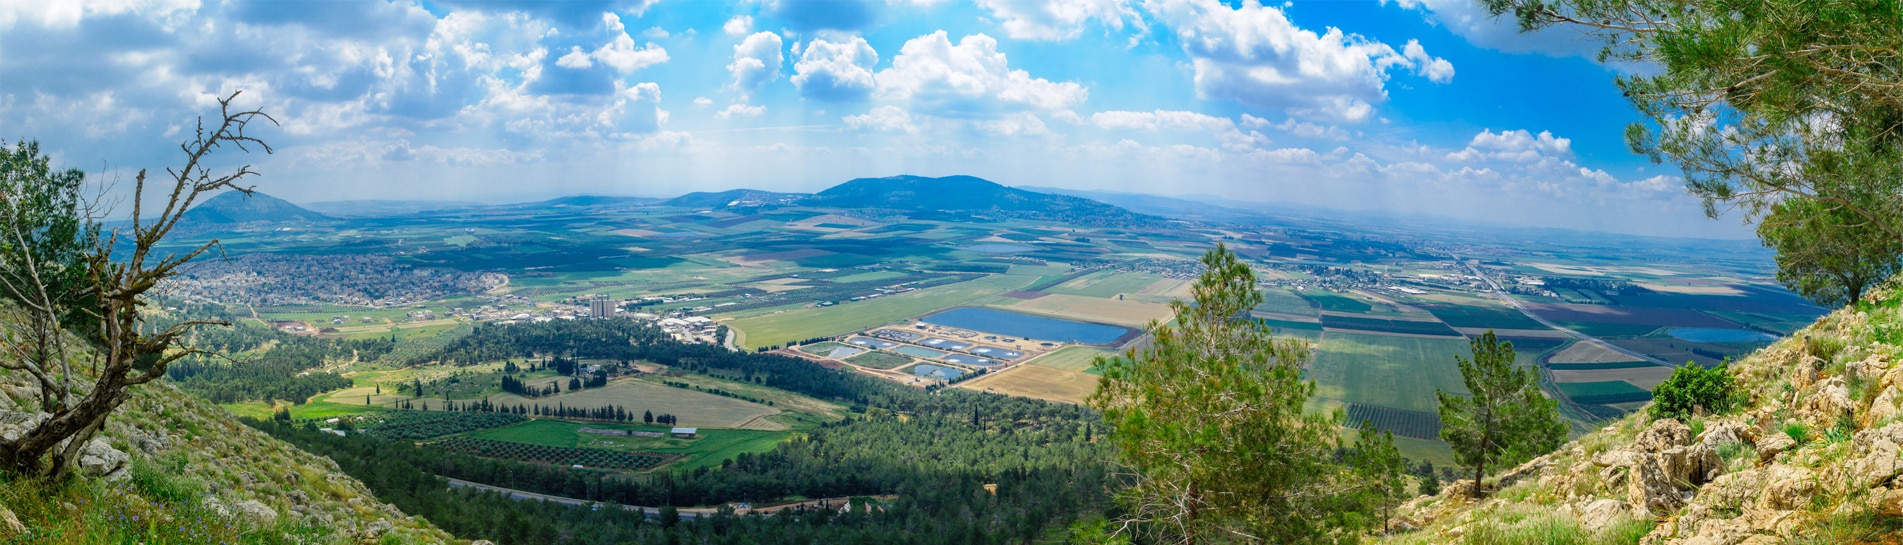 Galilee with Kids: Fun in the north of Israel